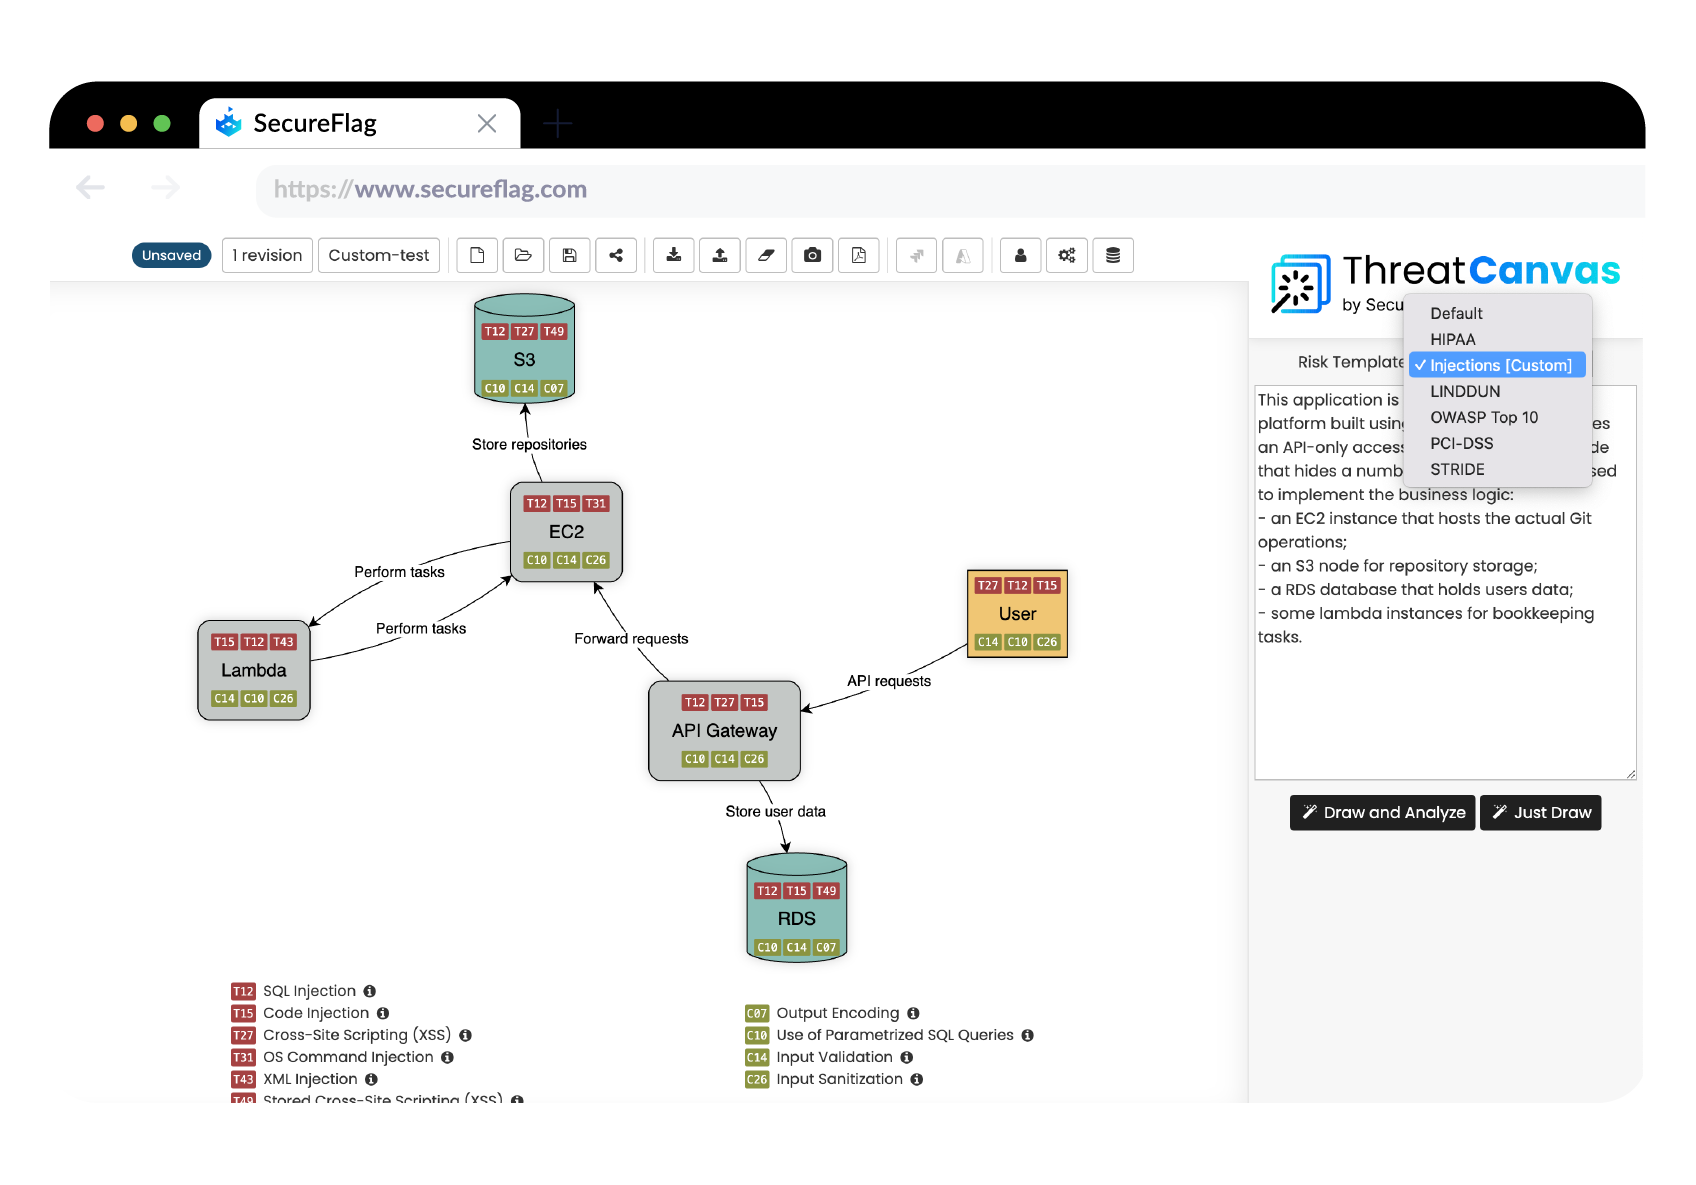 Image of ThreatCanvas and Custom Threat template in use